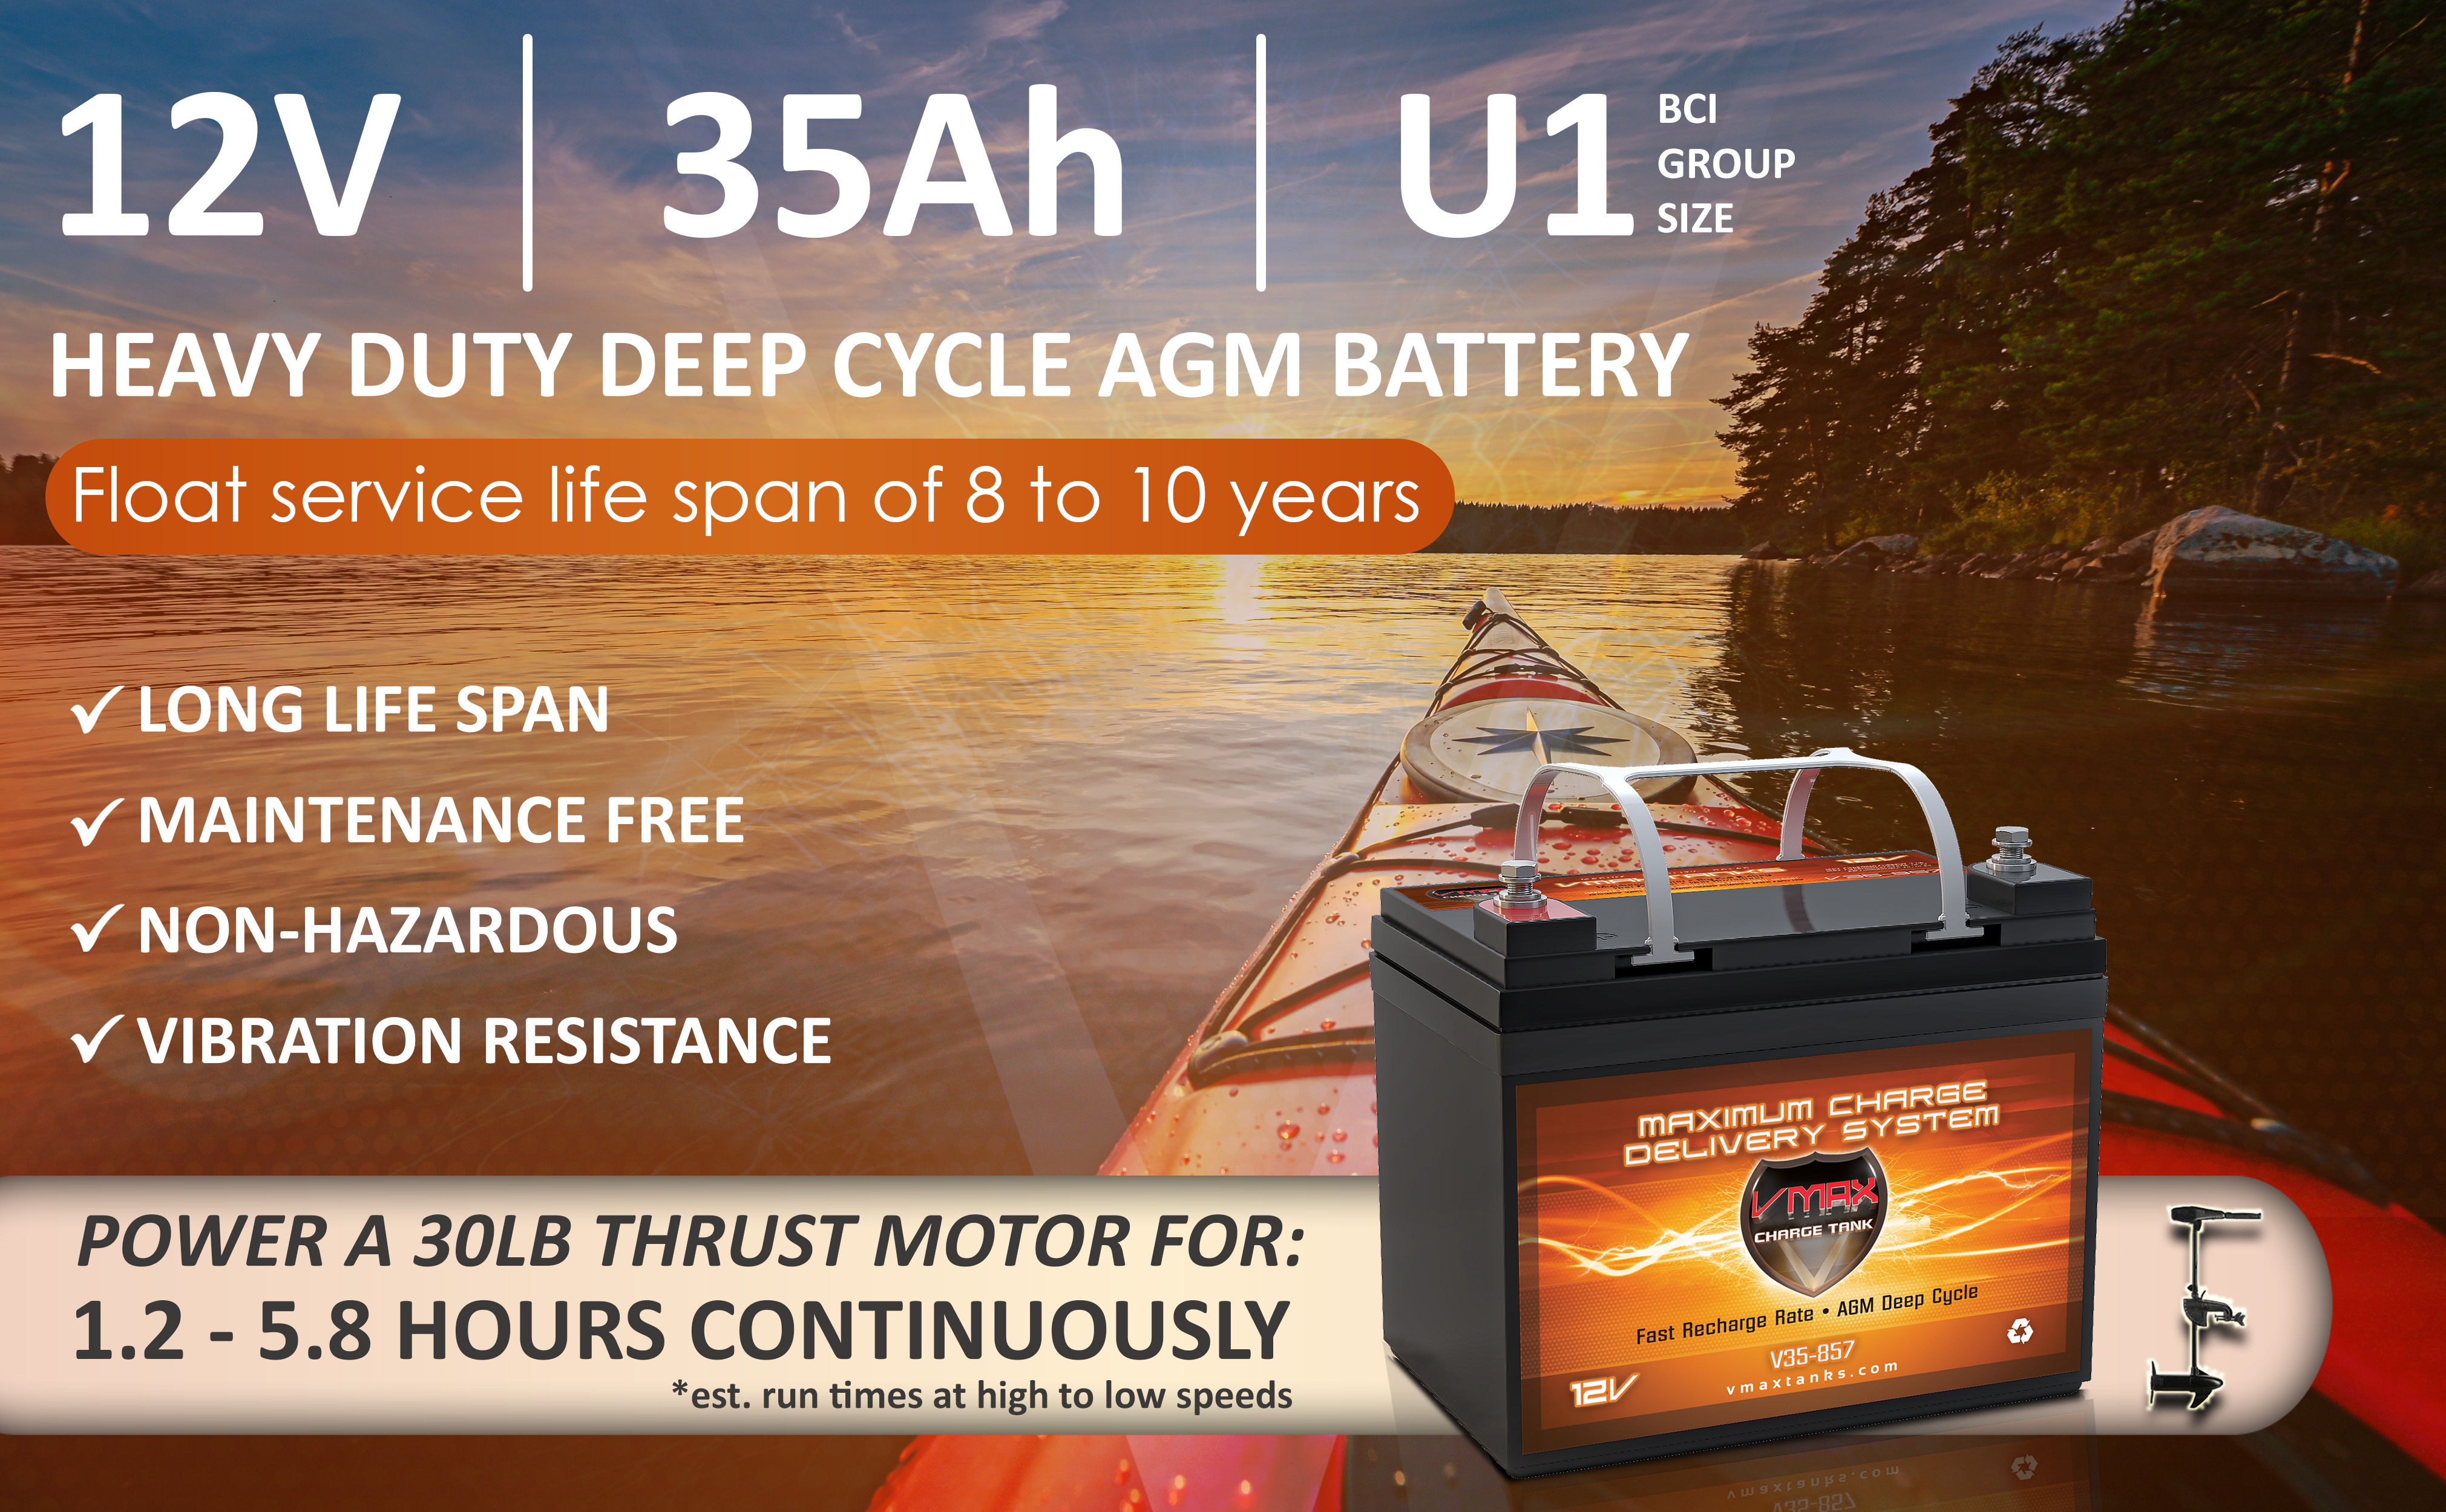 VMAX V35-857 12V 35AH AGM Deep Cycle U1 Battery (7.7"x 5"x 6.1") for Motorguide X3 Freshwater Foot Control Bow Mount 45lbs 12V Trolling Motor - image 3 of 8